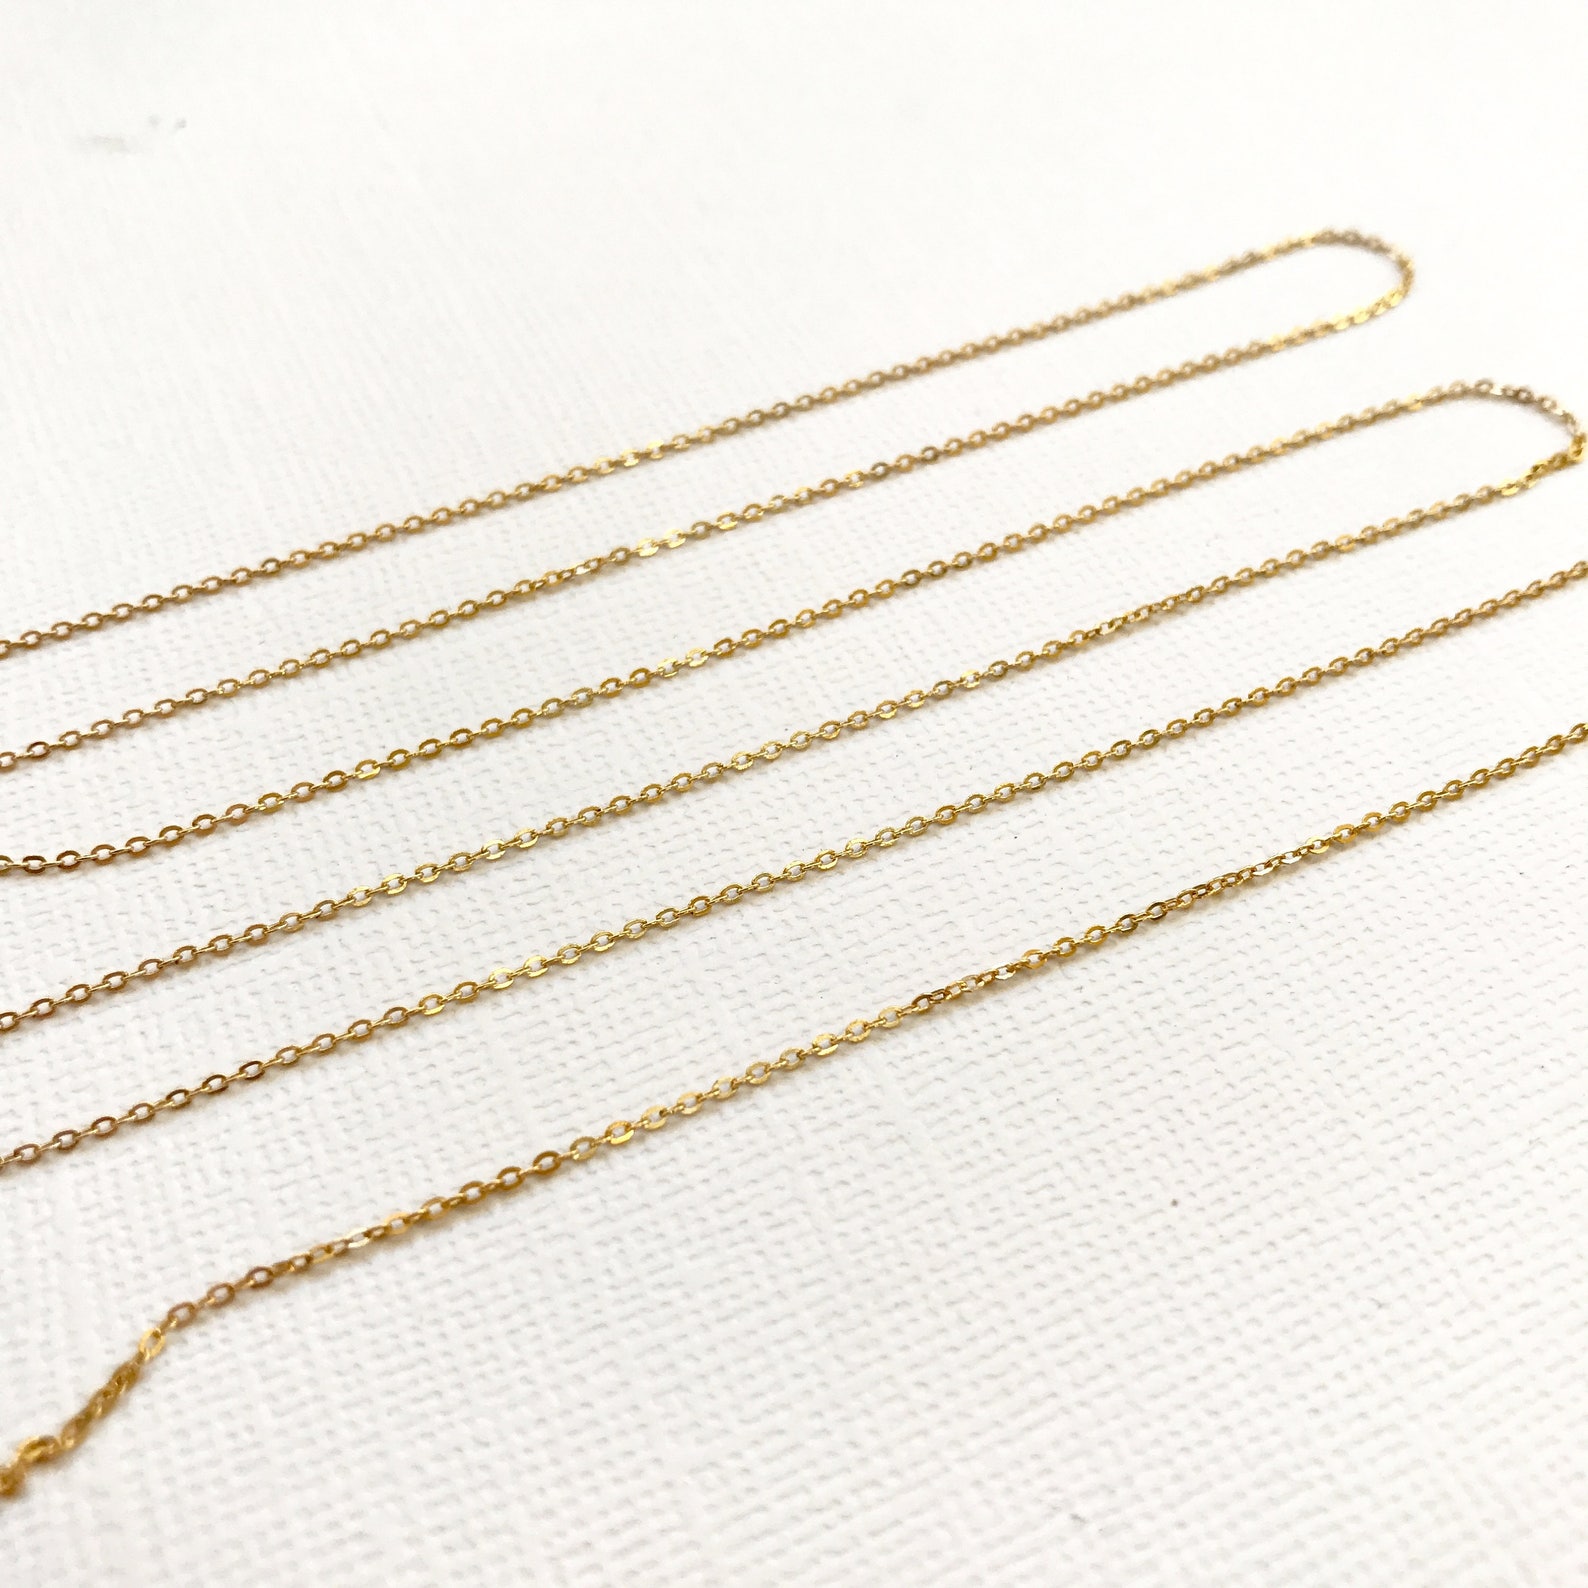 14K Gold Fill 1.1mm Flat Cable Chain BY FOOT Soldered Links | Etsy